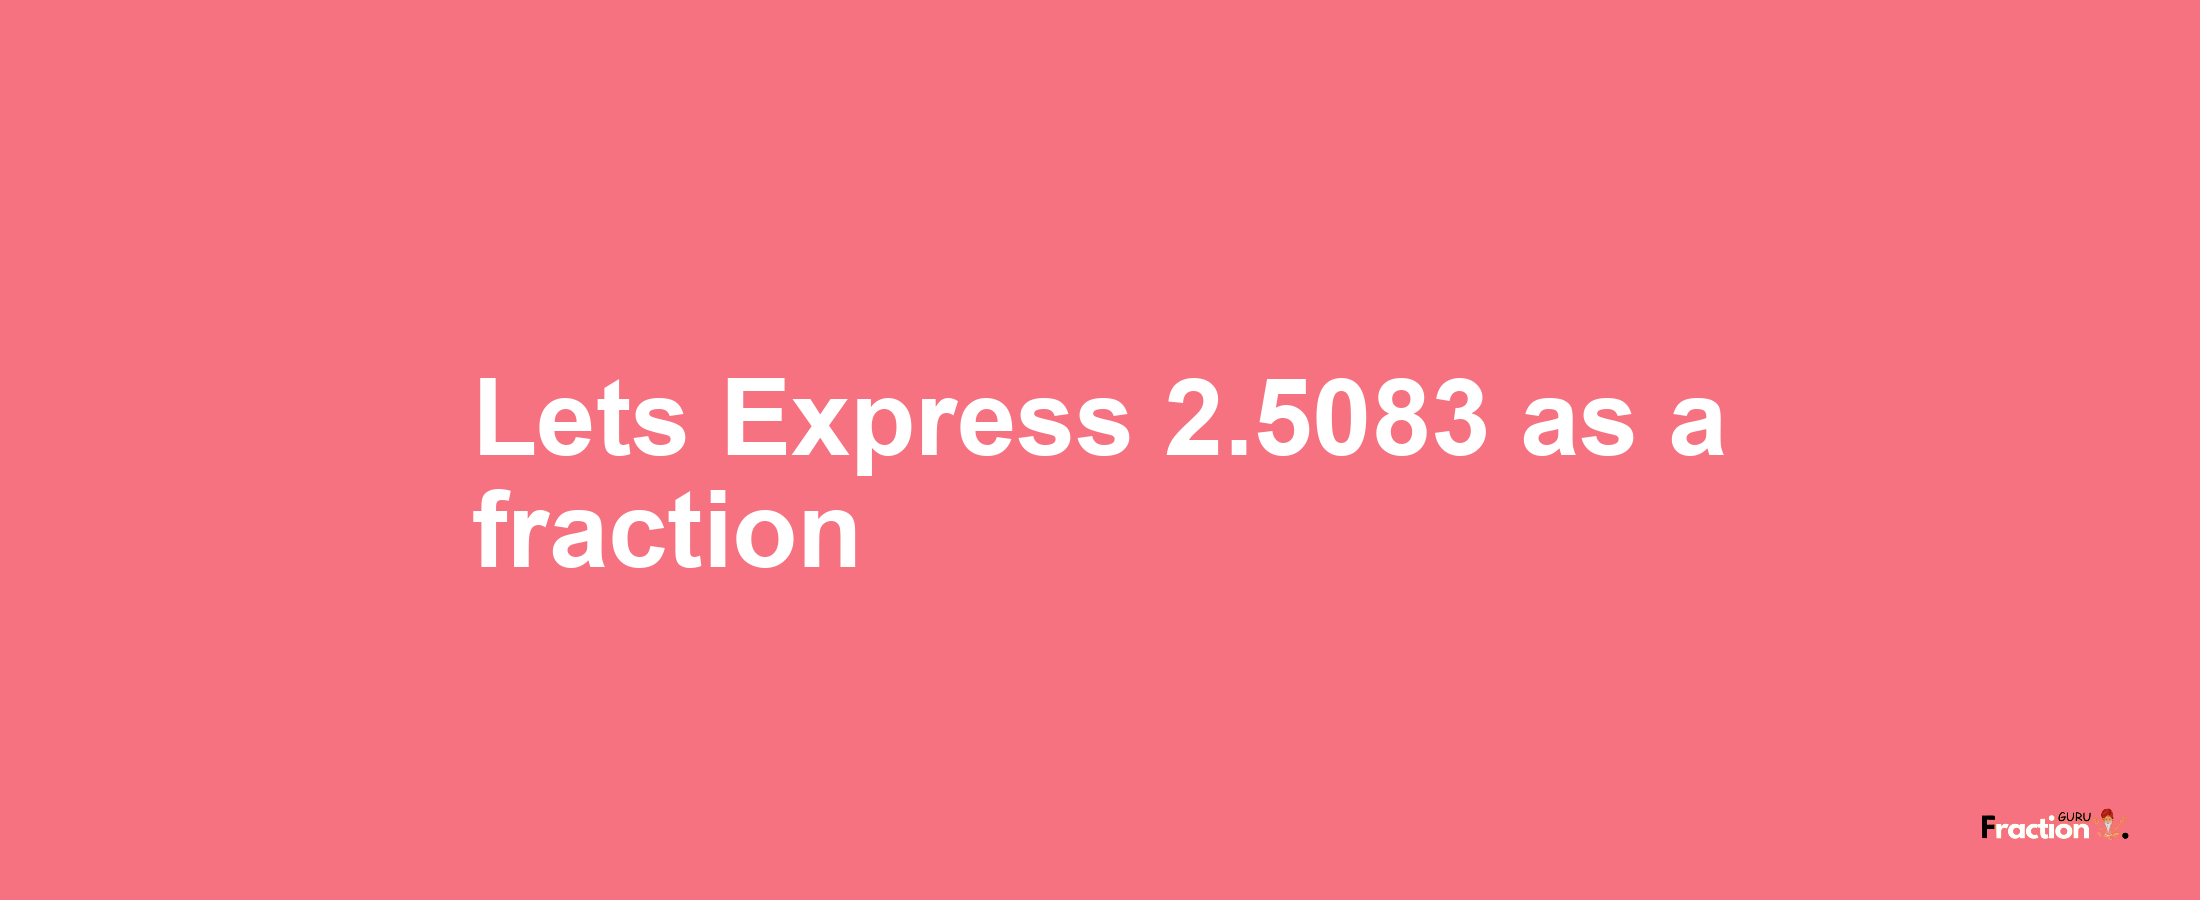 Lets Express 2.5083 as afraction